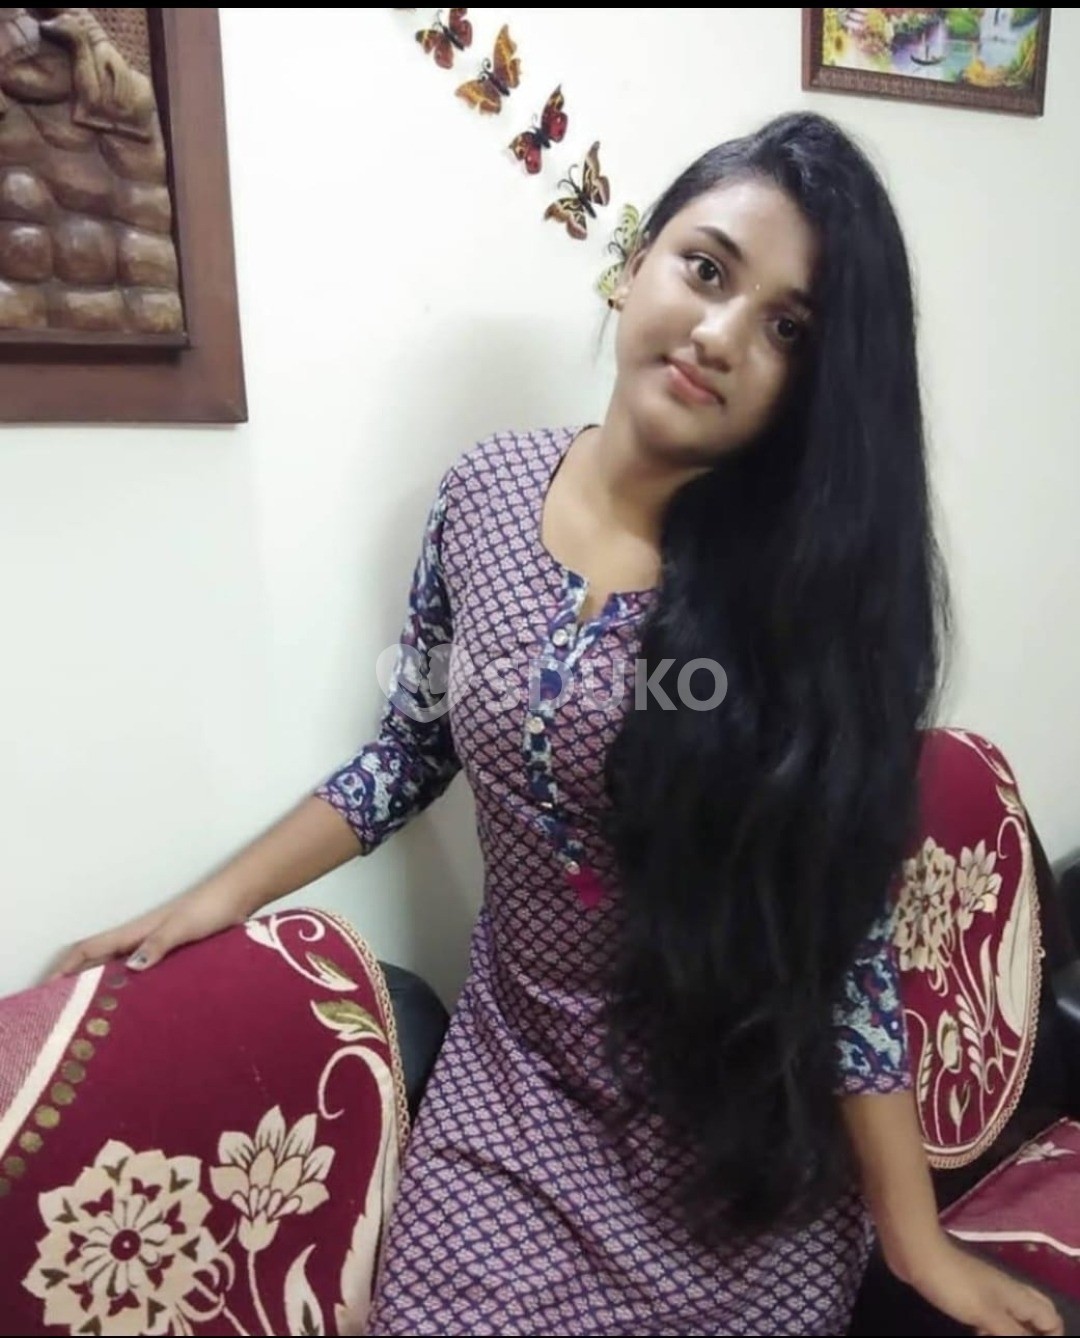 Coimbatore 💙,.._MY SELF DIVYA UNLIMITED SEX CUTE BEST SERVICE AND 24 HR AVAILABLE